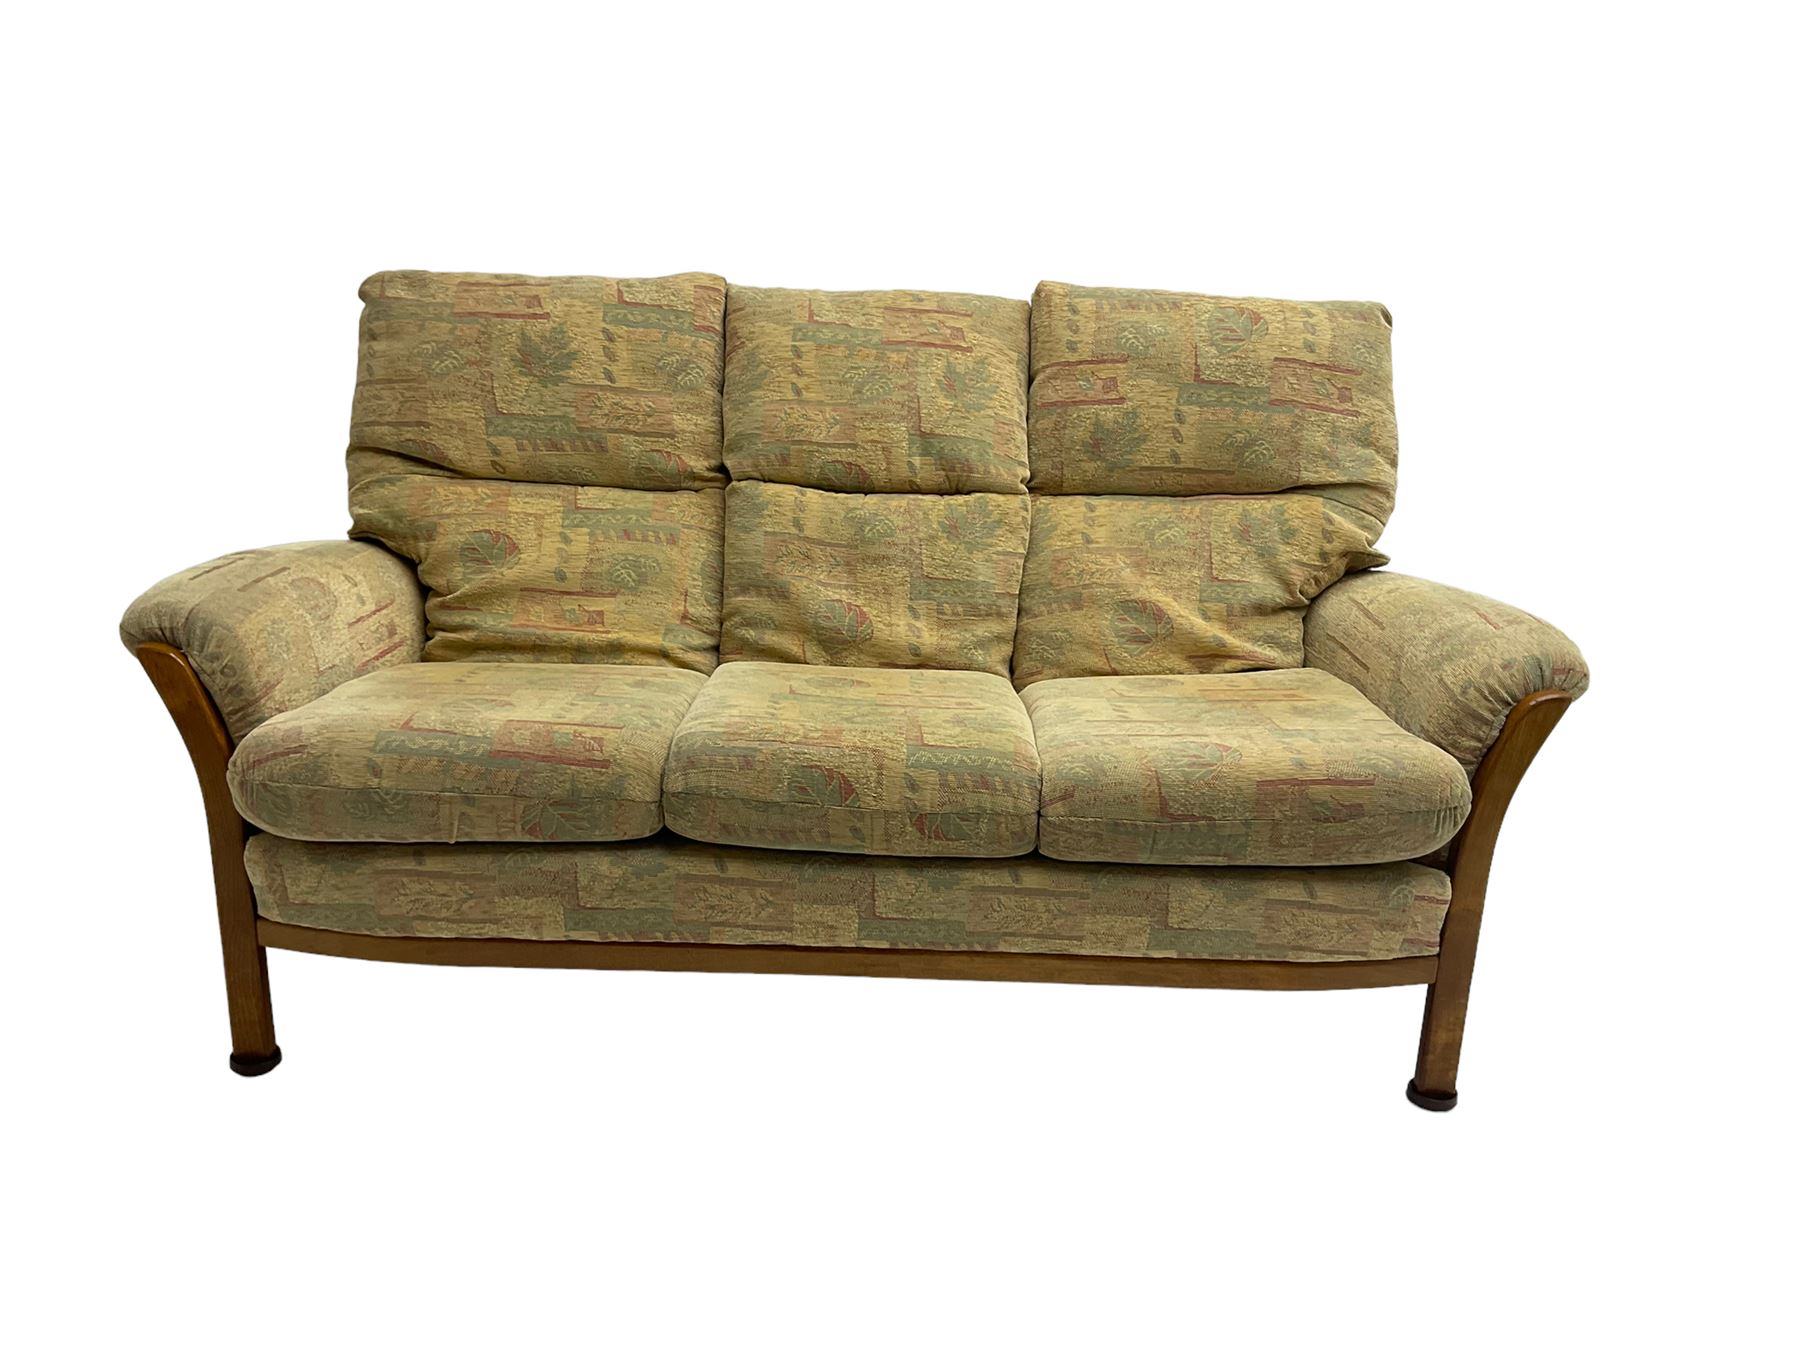 Mid-20th century beech framed three seat sofa (W1180cm) and pair of matching armchairs (W95cm) uphol - Image 14 of 15